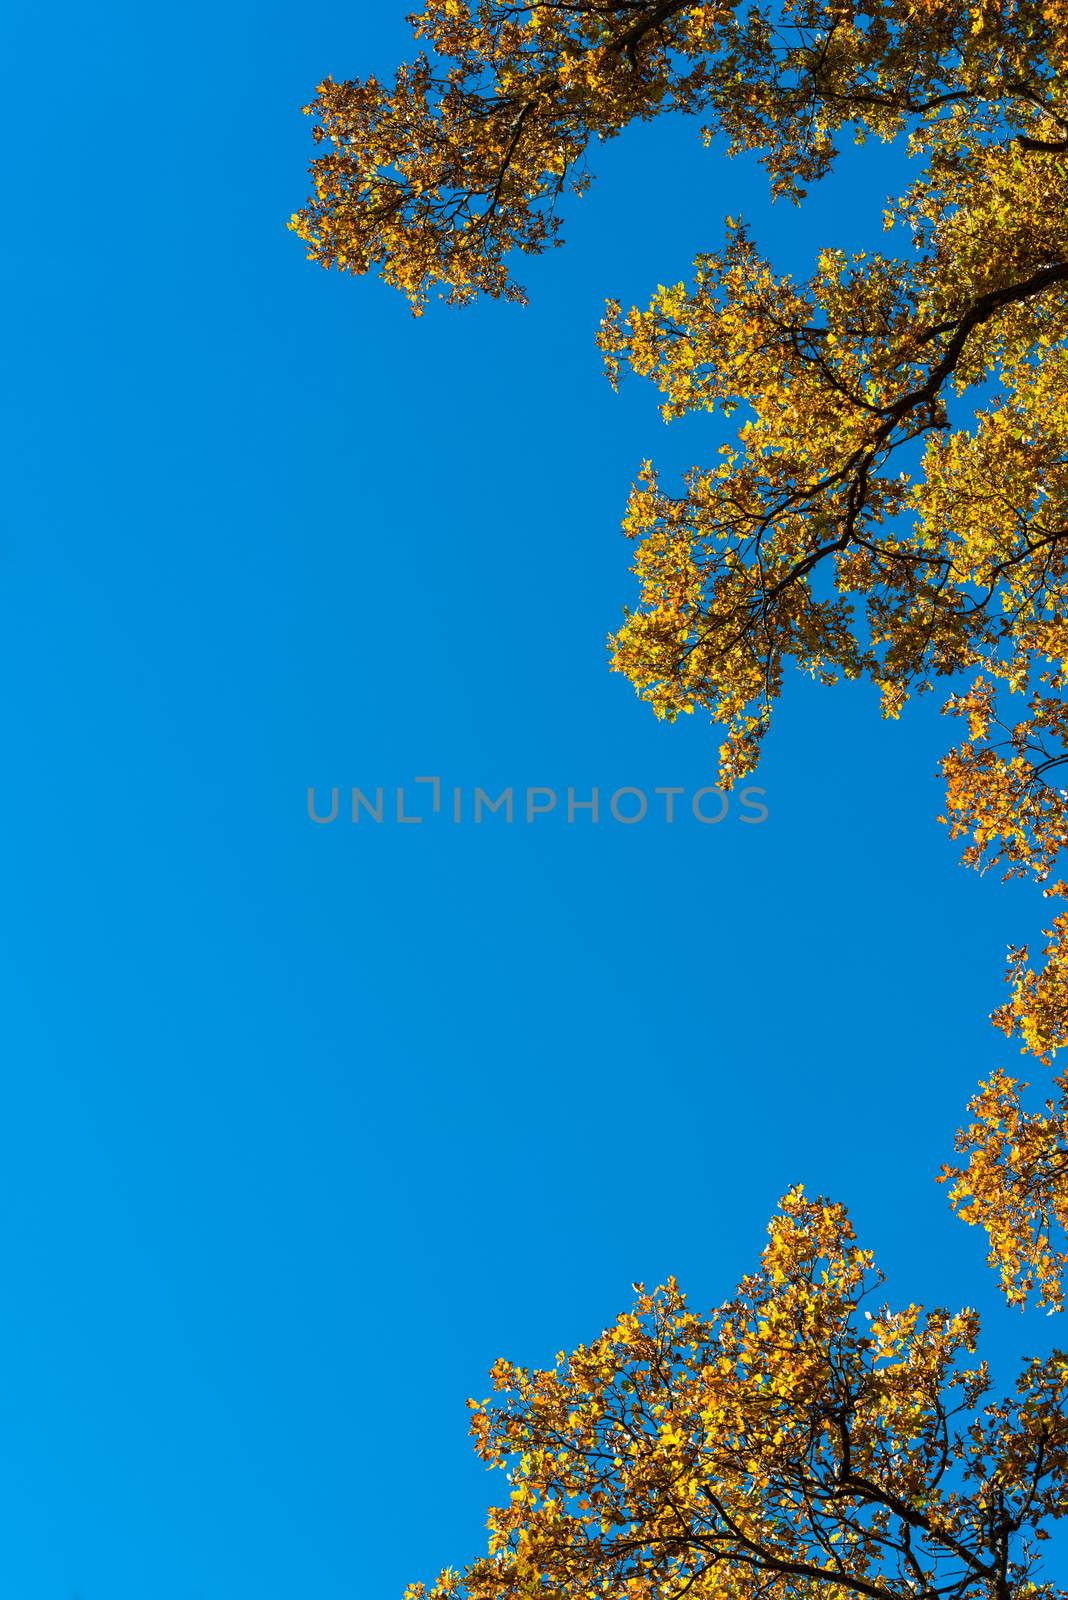 Autumn leaves against great blue sky with space for your copy text